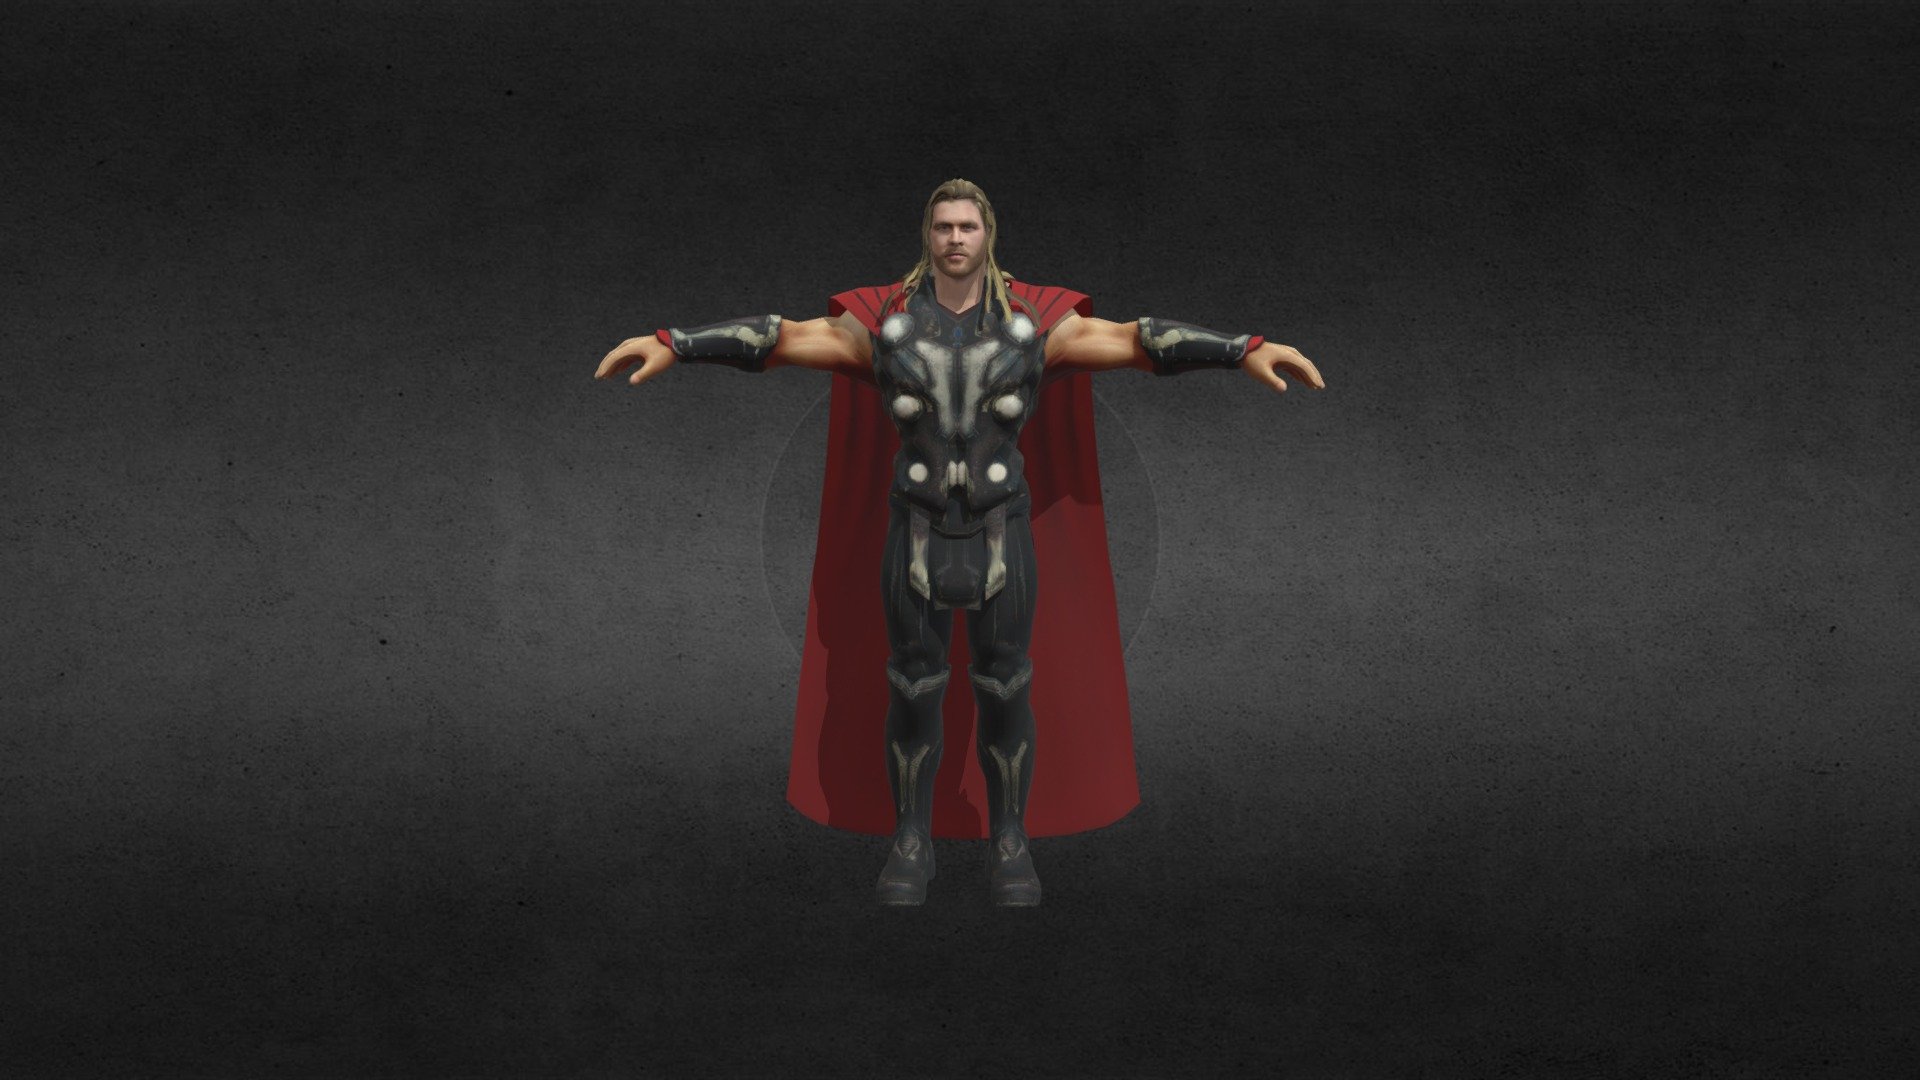 Hi I am Omaxx FF !!
Download These Awesome Models from me this very extreme quality Models.

This Is The Model Of Thor !!
But The Texture Of The Thor Is Very Awesome Download And then See ❤️

There Is Many Formats Of 3D Model :-
° OBJ (.obj .mtl )
° Autodesk Fbx (.fbx)
° Blender (.blender)
° Stereolithography ( .STL) - Thor 3D Model - 3D model by OmaxxFF 3d model